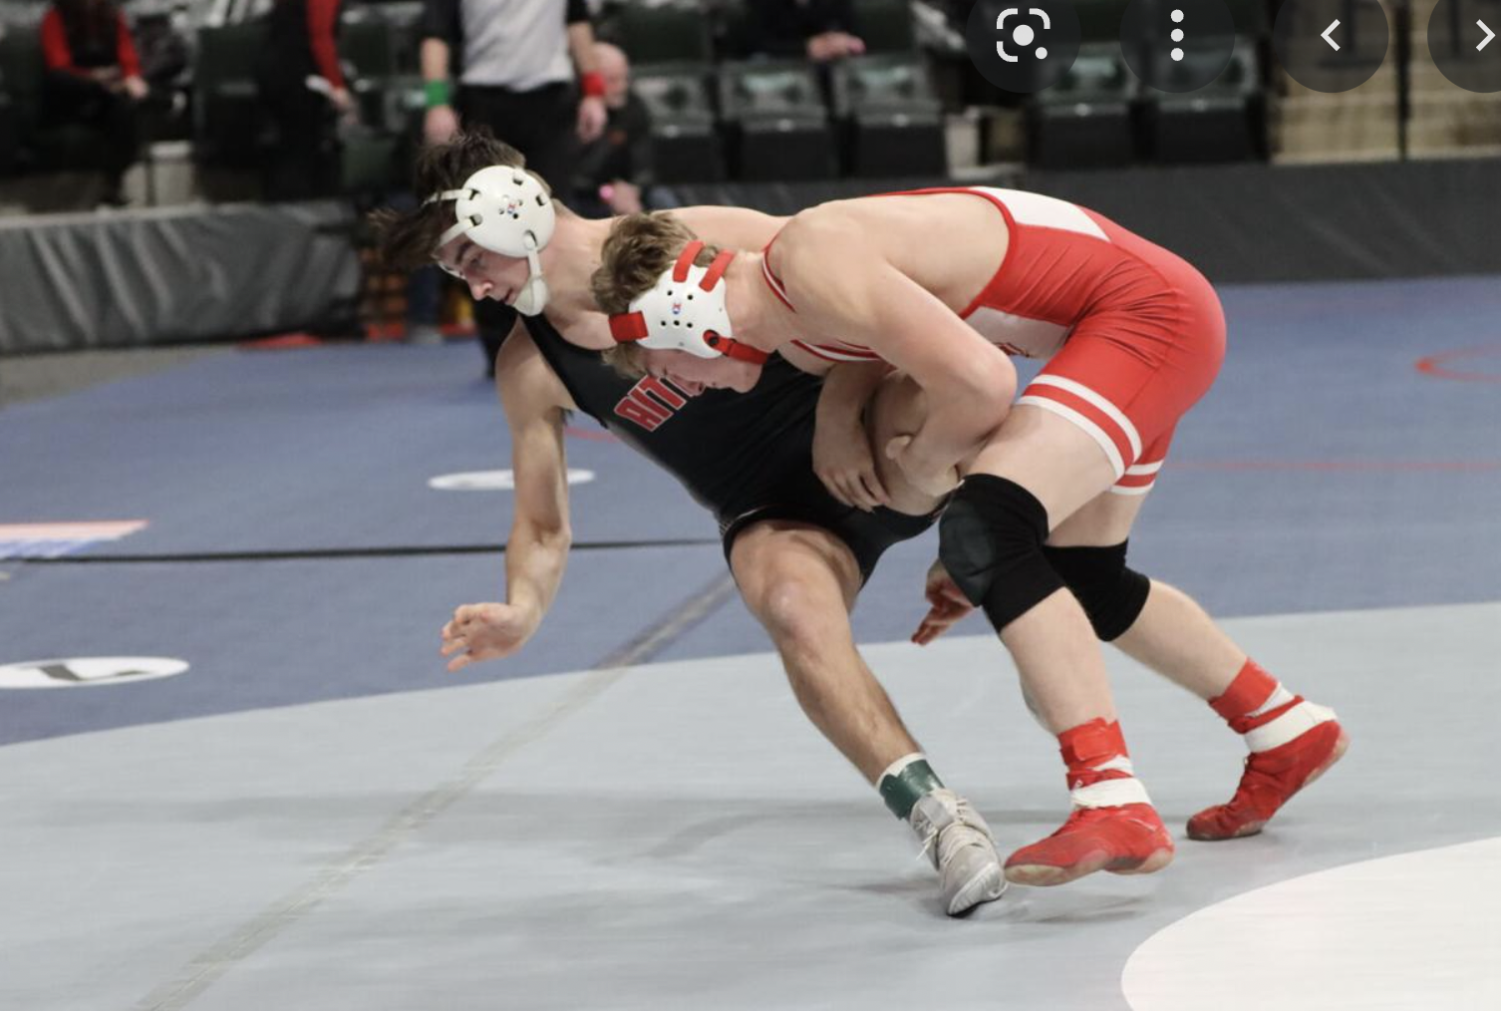 Gettel taking down his opponent at the State Tournament.